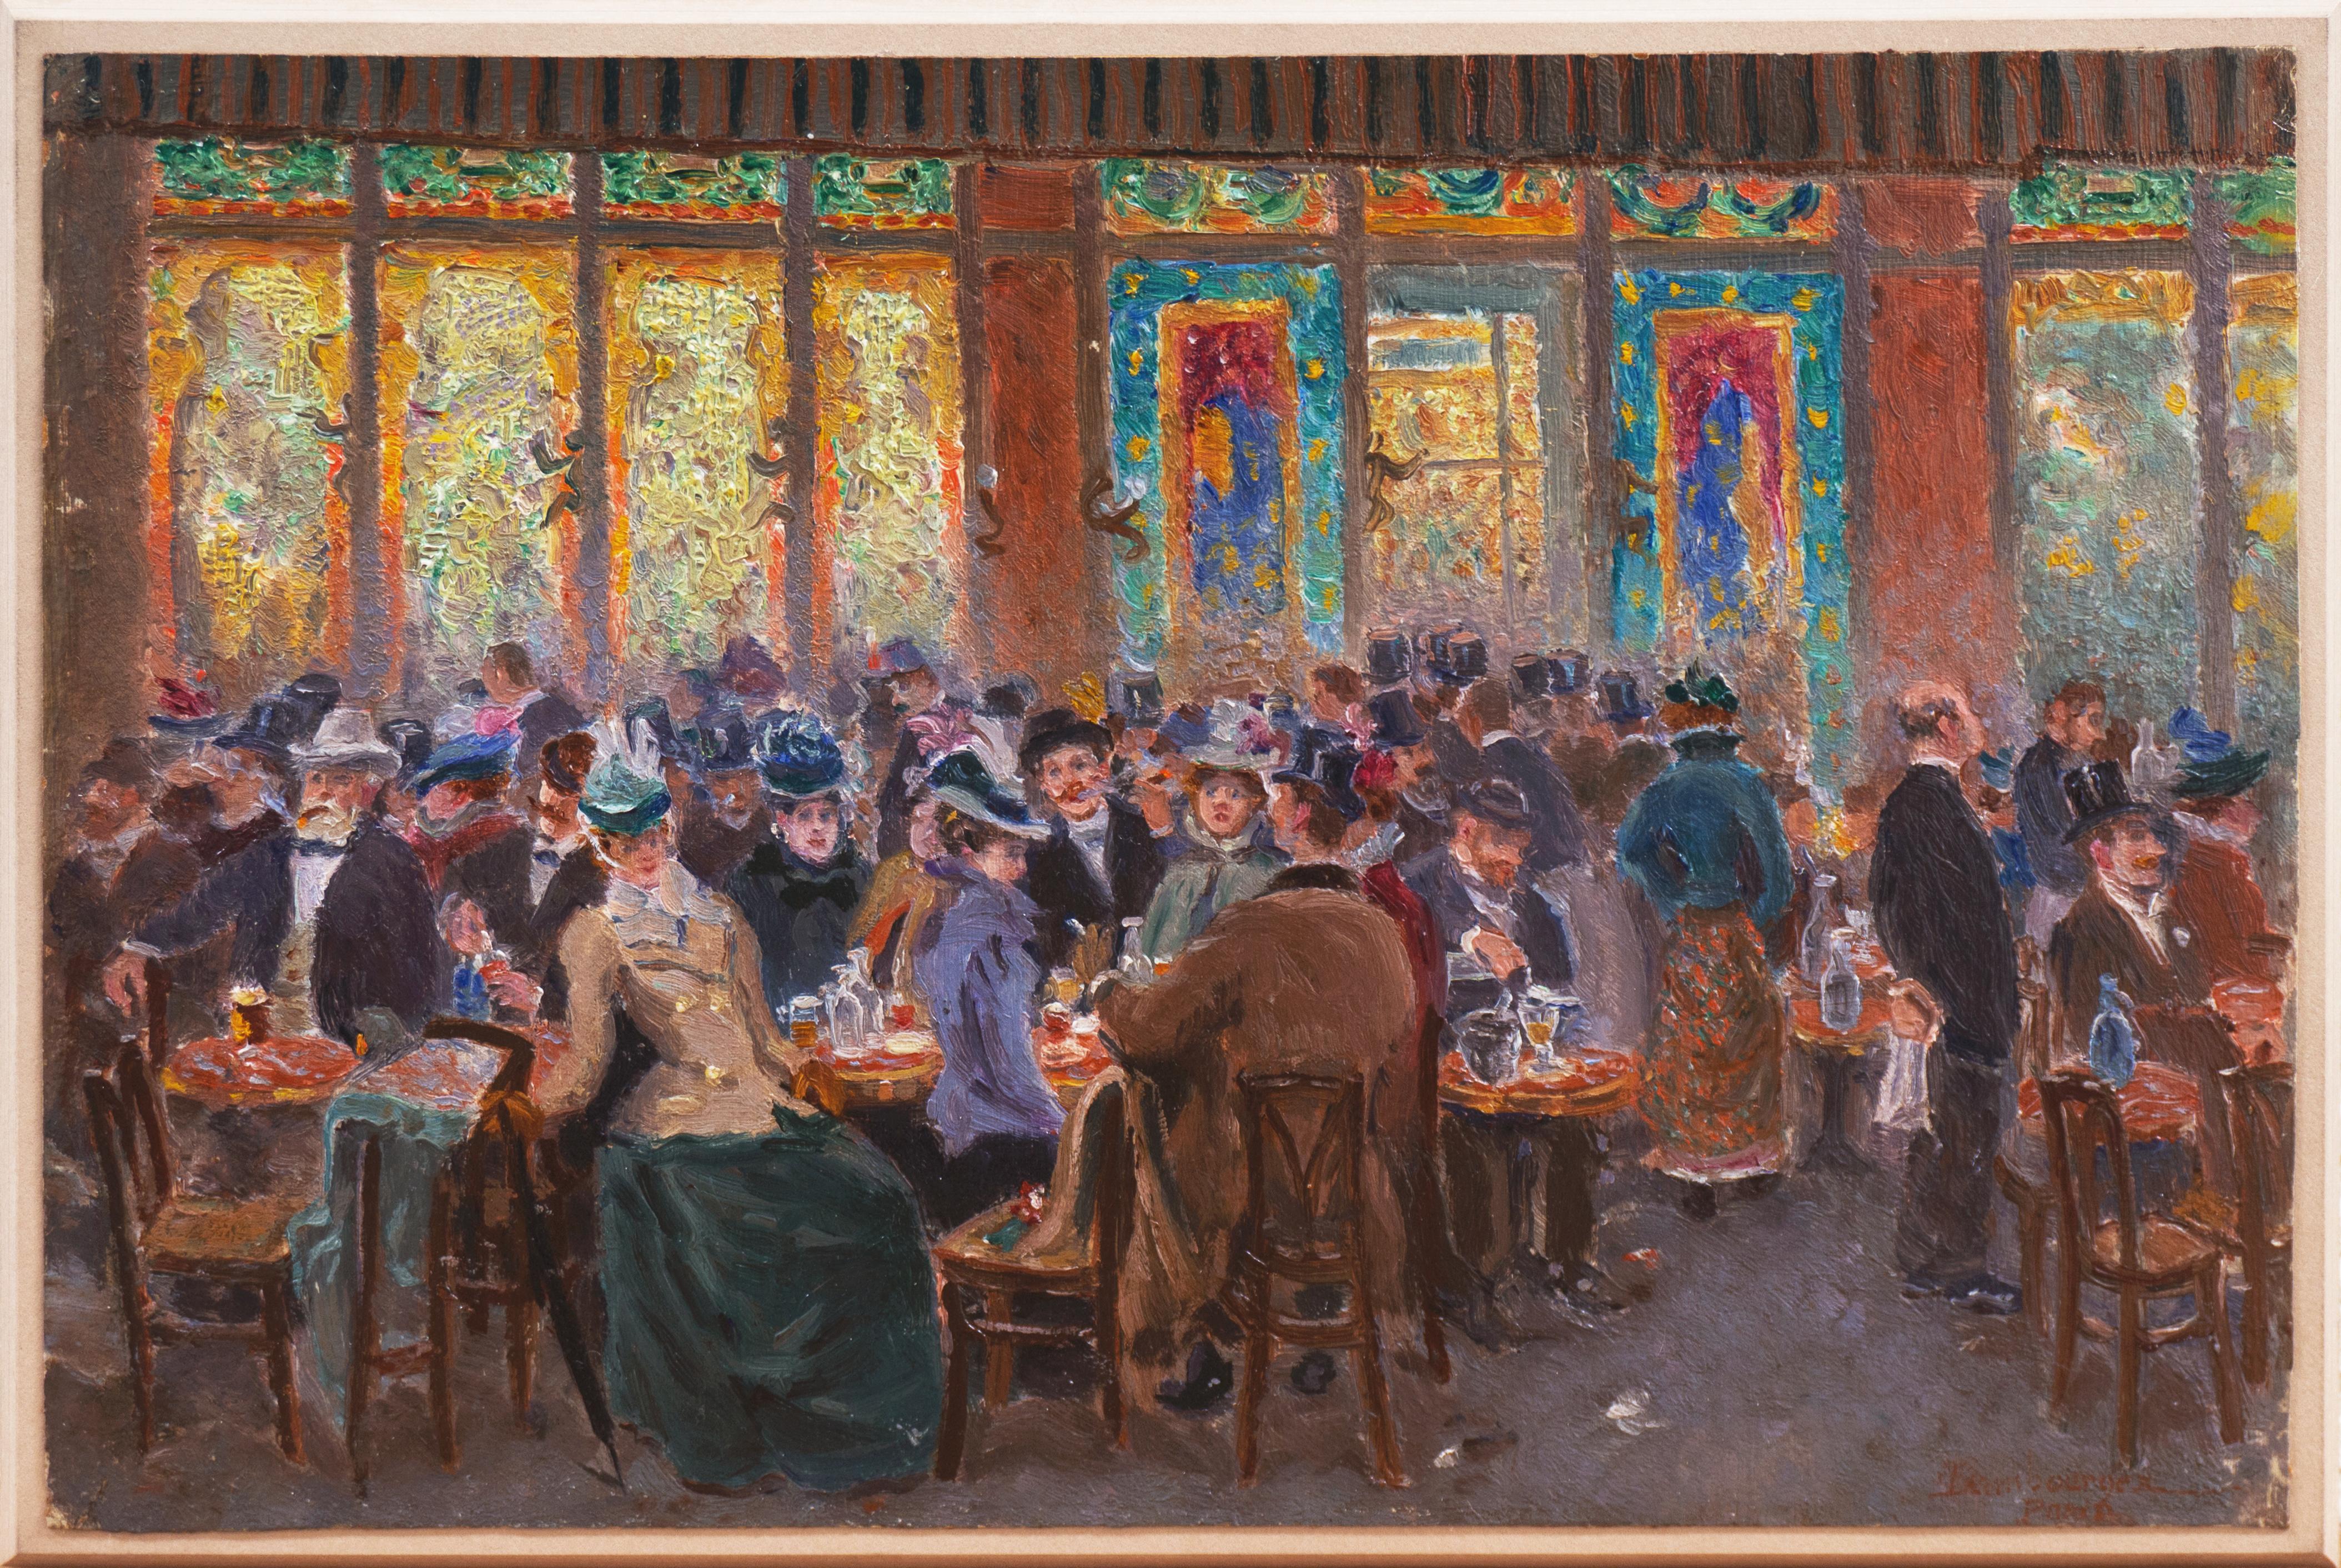 Signed lower right, 'Dambourgez' for Edouard-Jean Dambourgez (French, 1844-1931), titled, 'Paris' and painted circa 1880. Titled with inscription, verso, on old backing, ''Taverne Pausset', grands boulevards a Paris